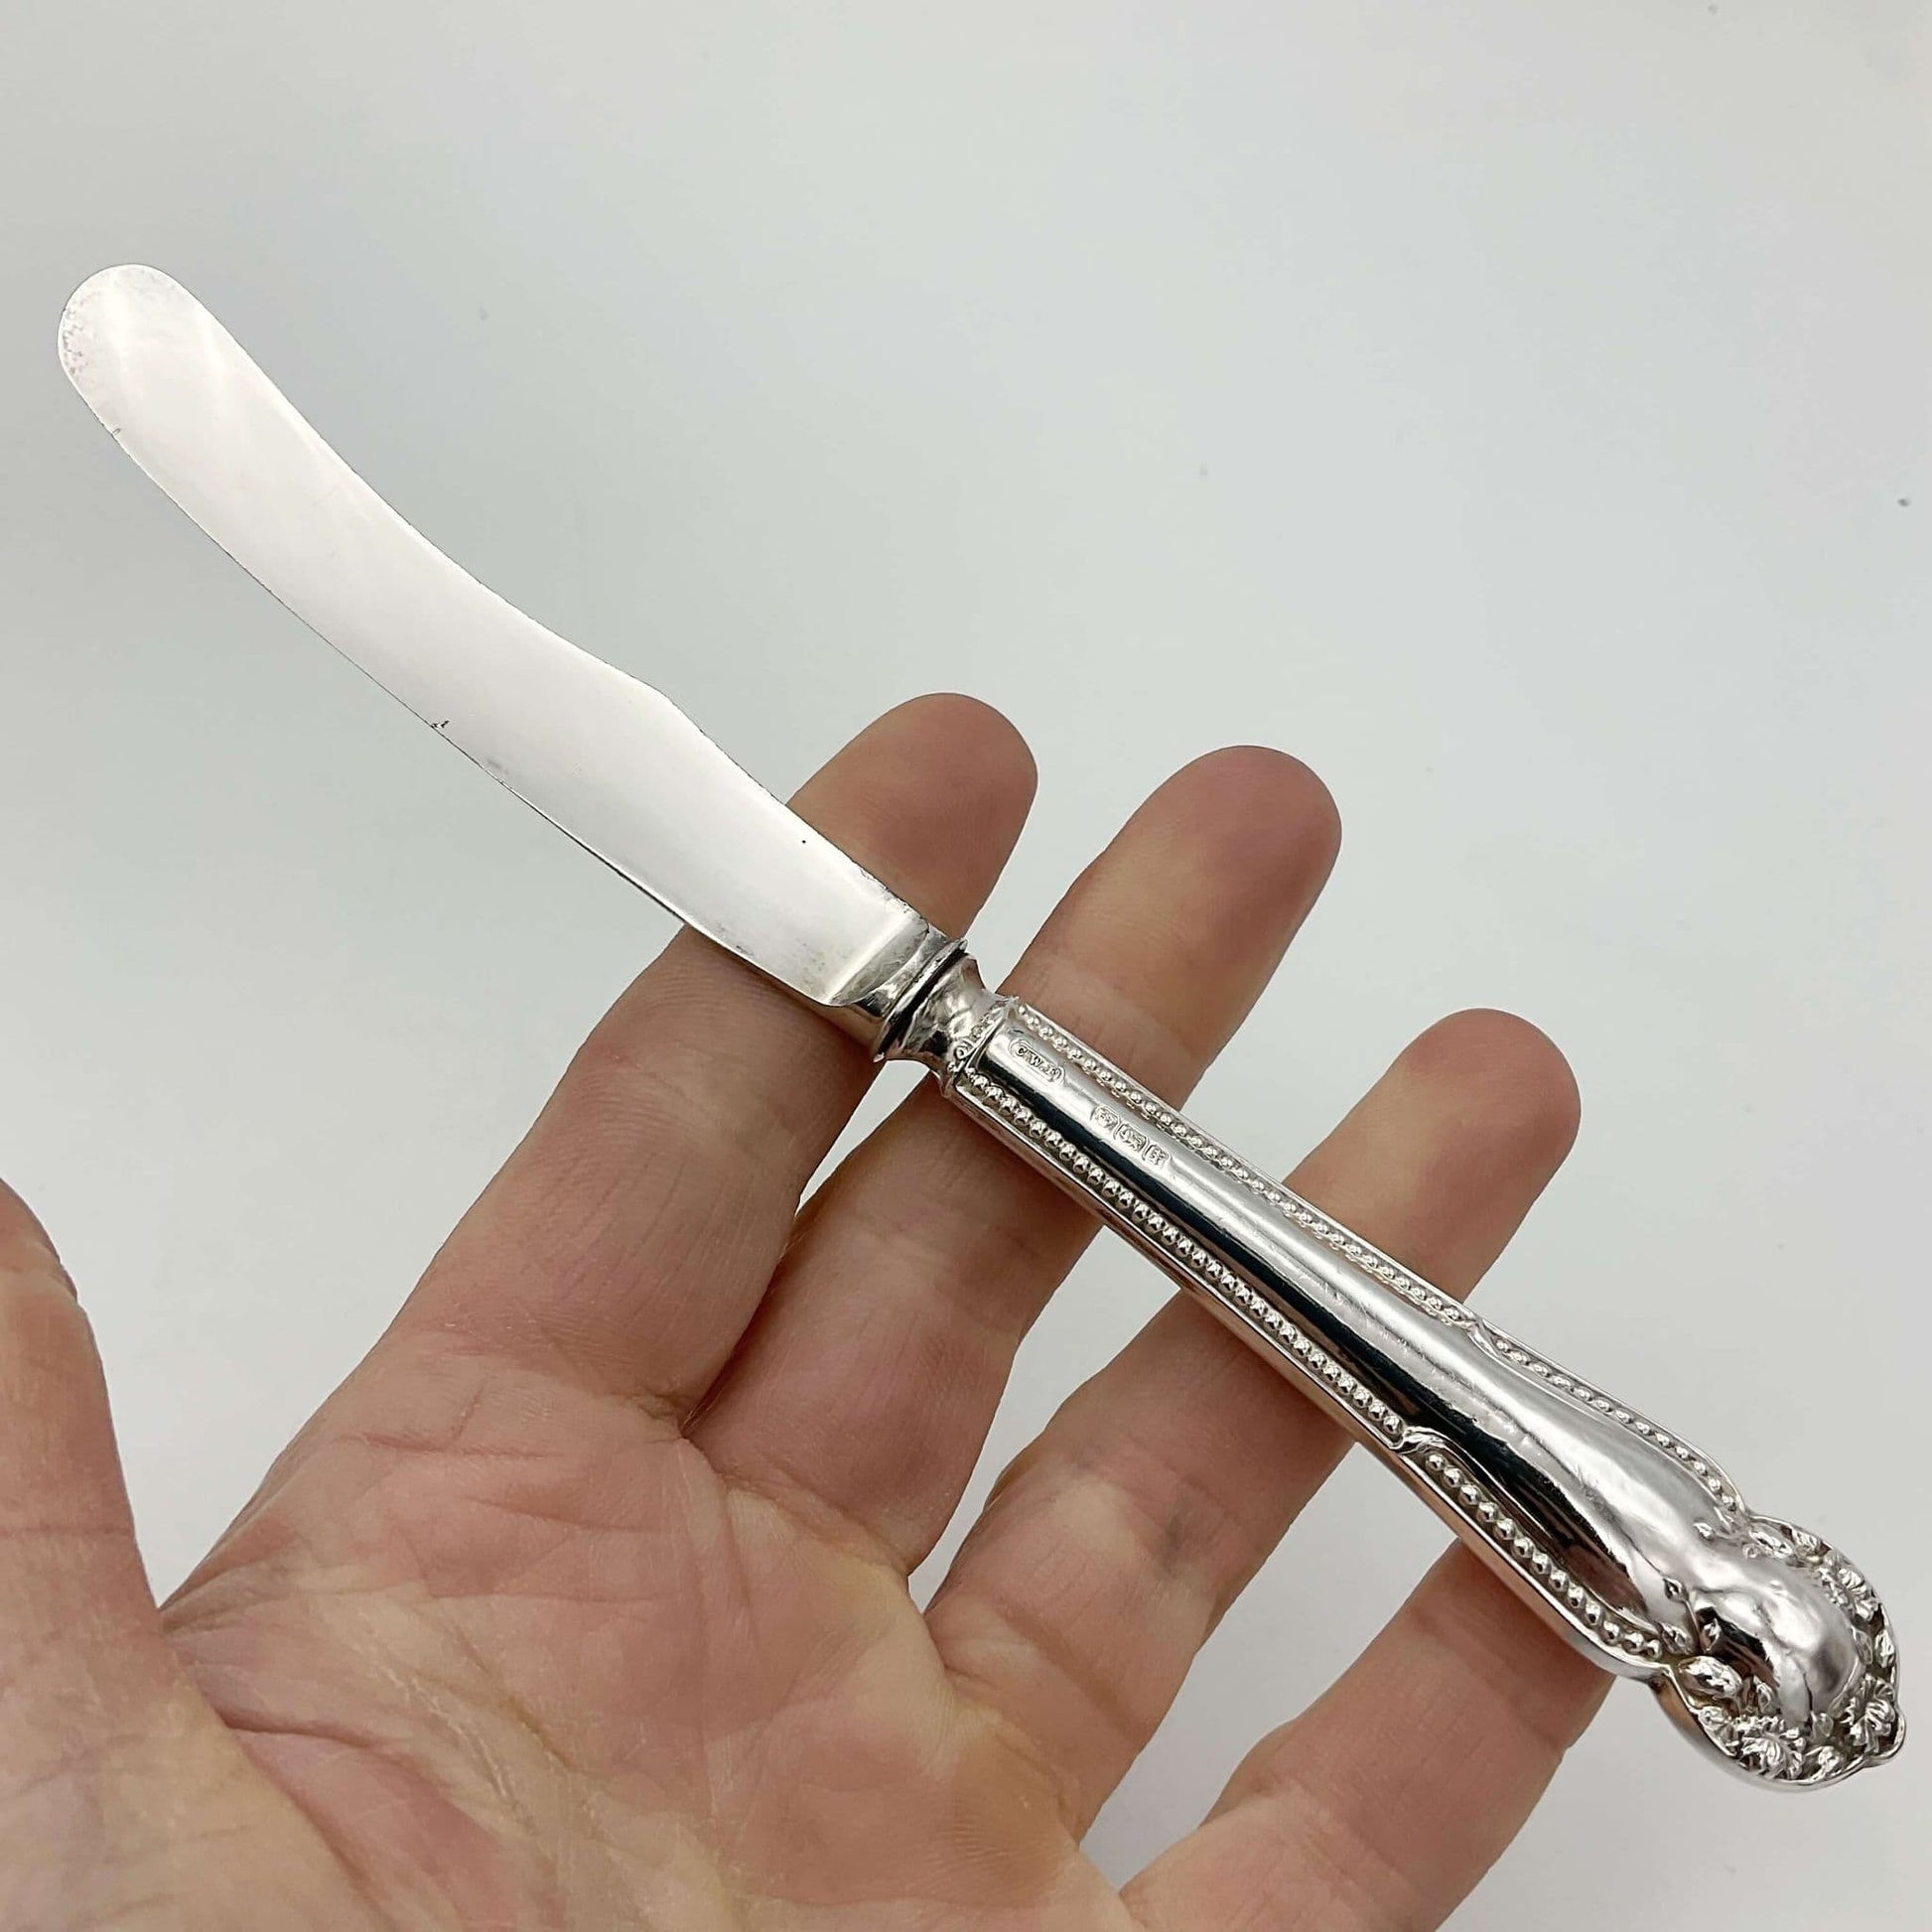 Antique silver side knife held in a hand